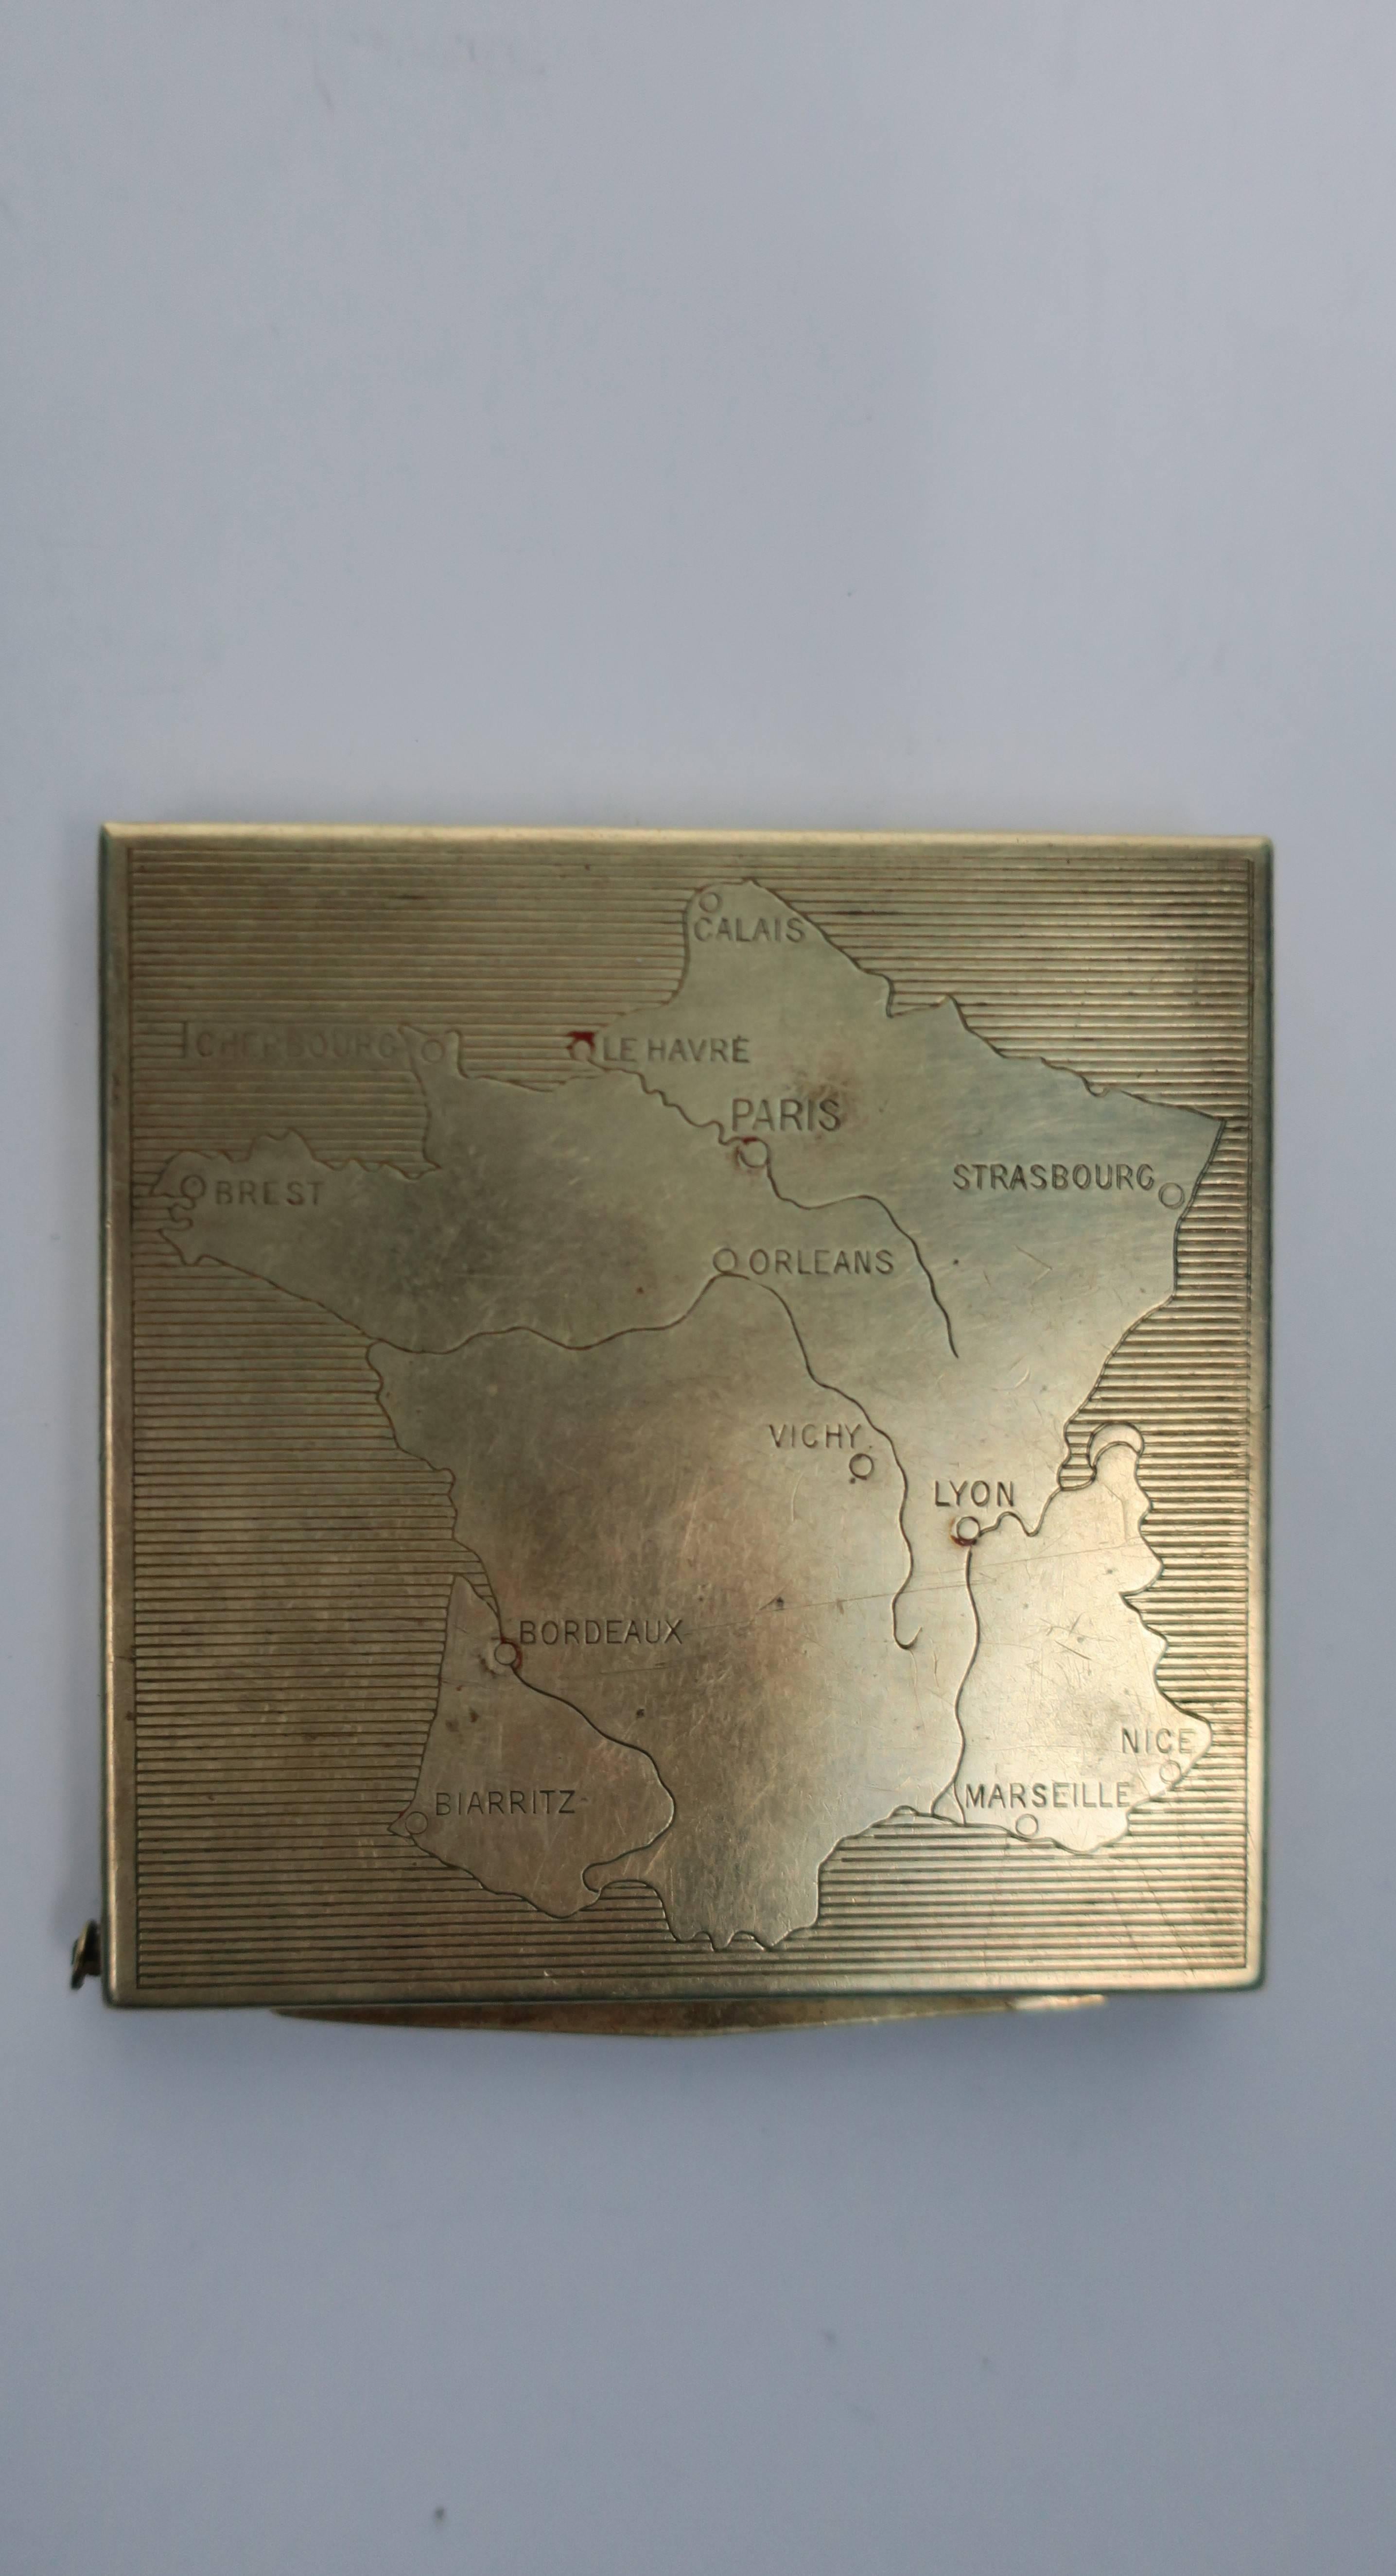 Embossed Vintage Brass and Mirror Compact Case or Box with Map of France